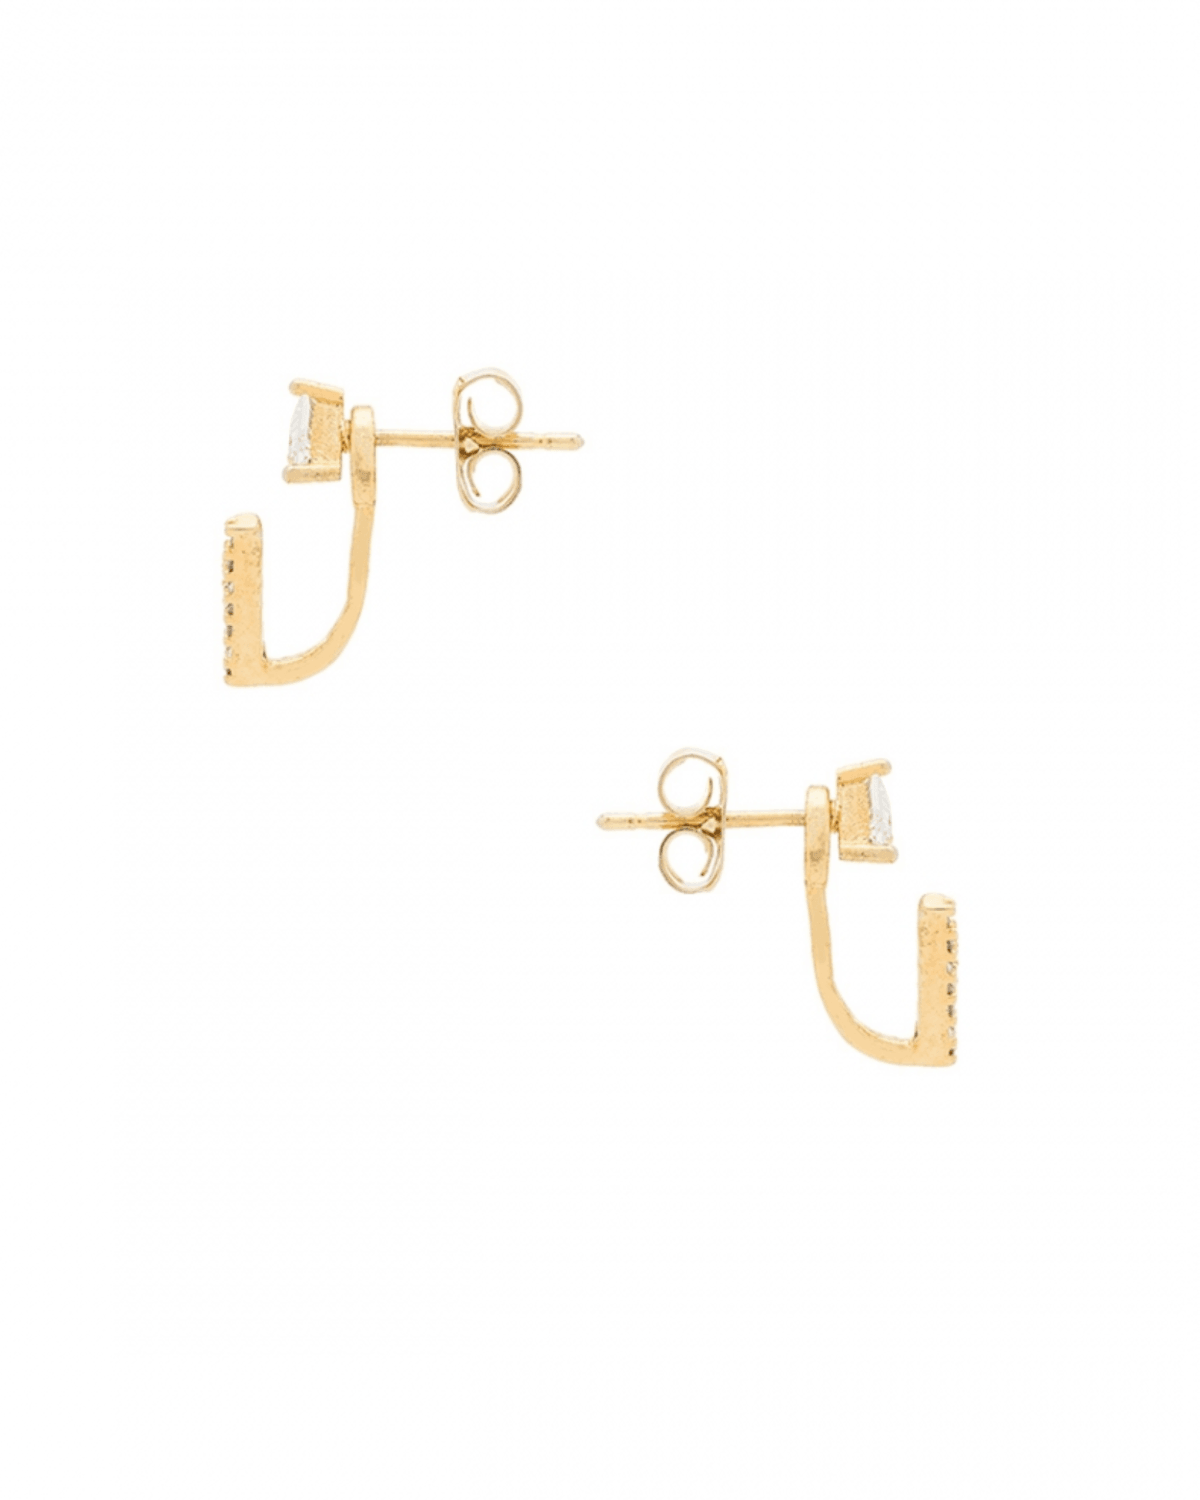 VENICE EAR CUFF - 8 Other Reasons